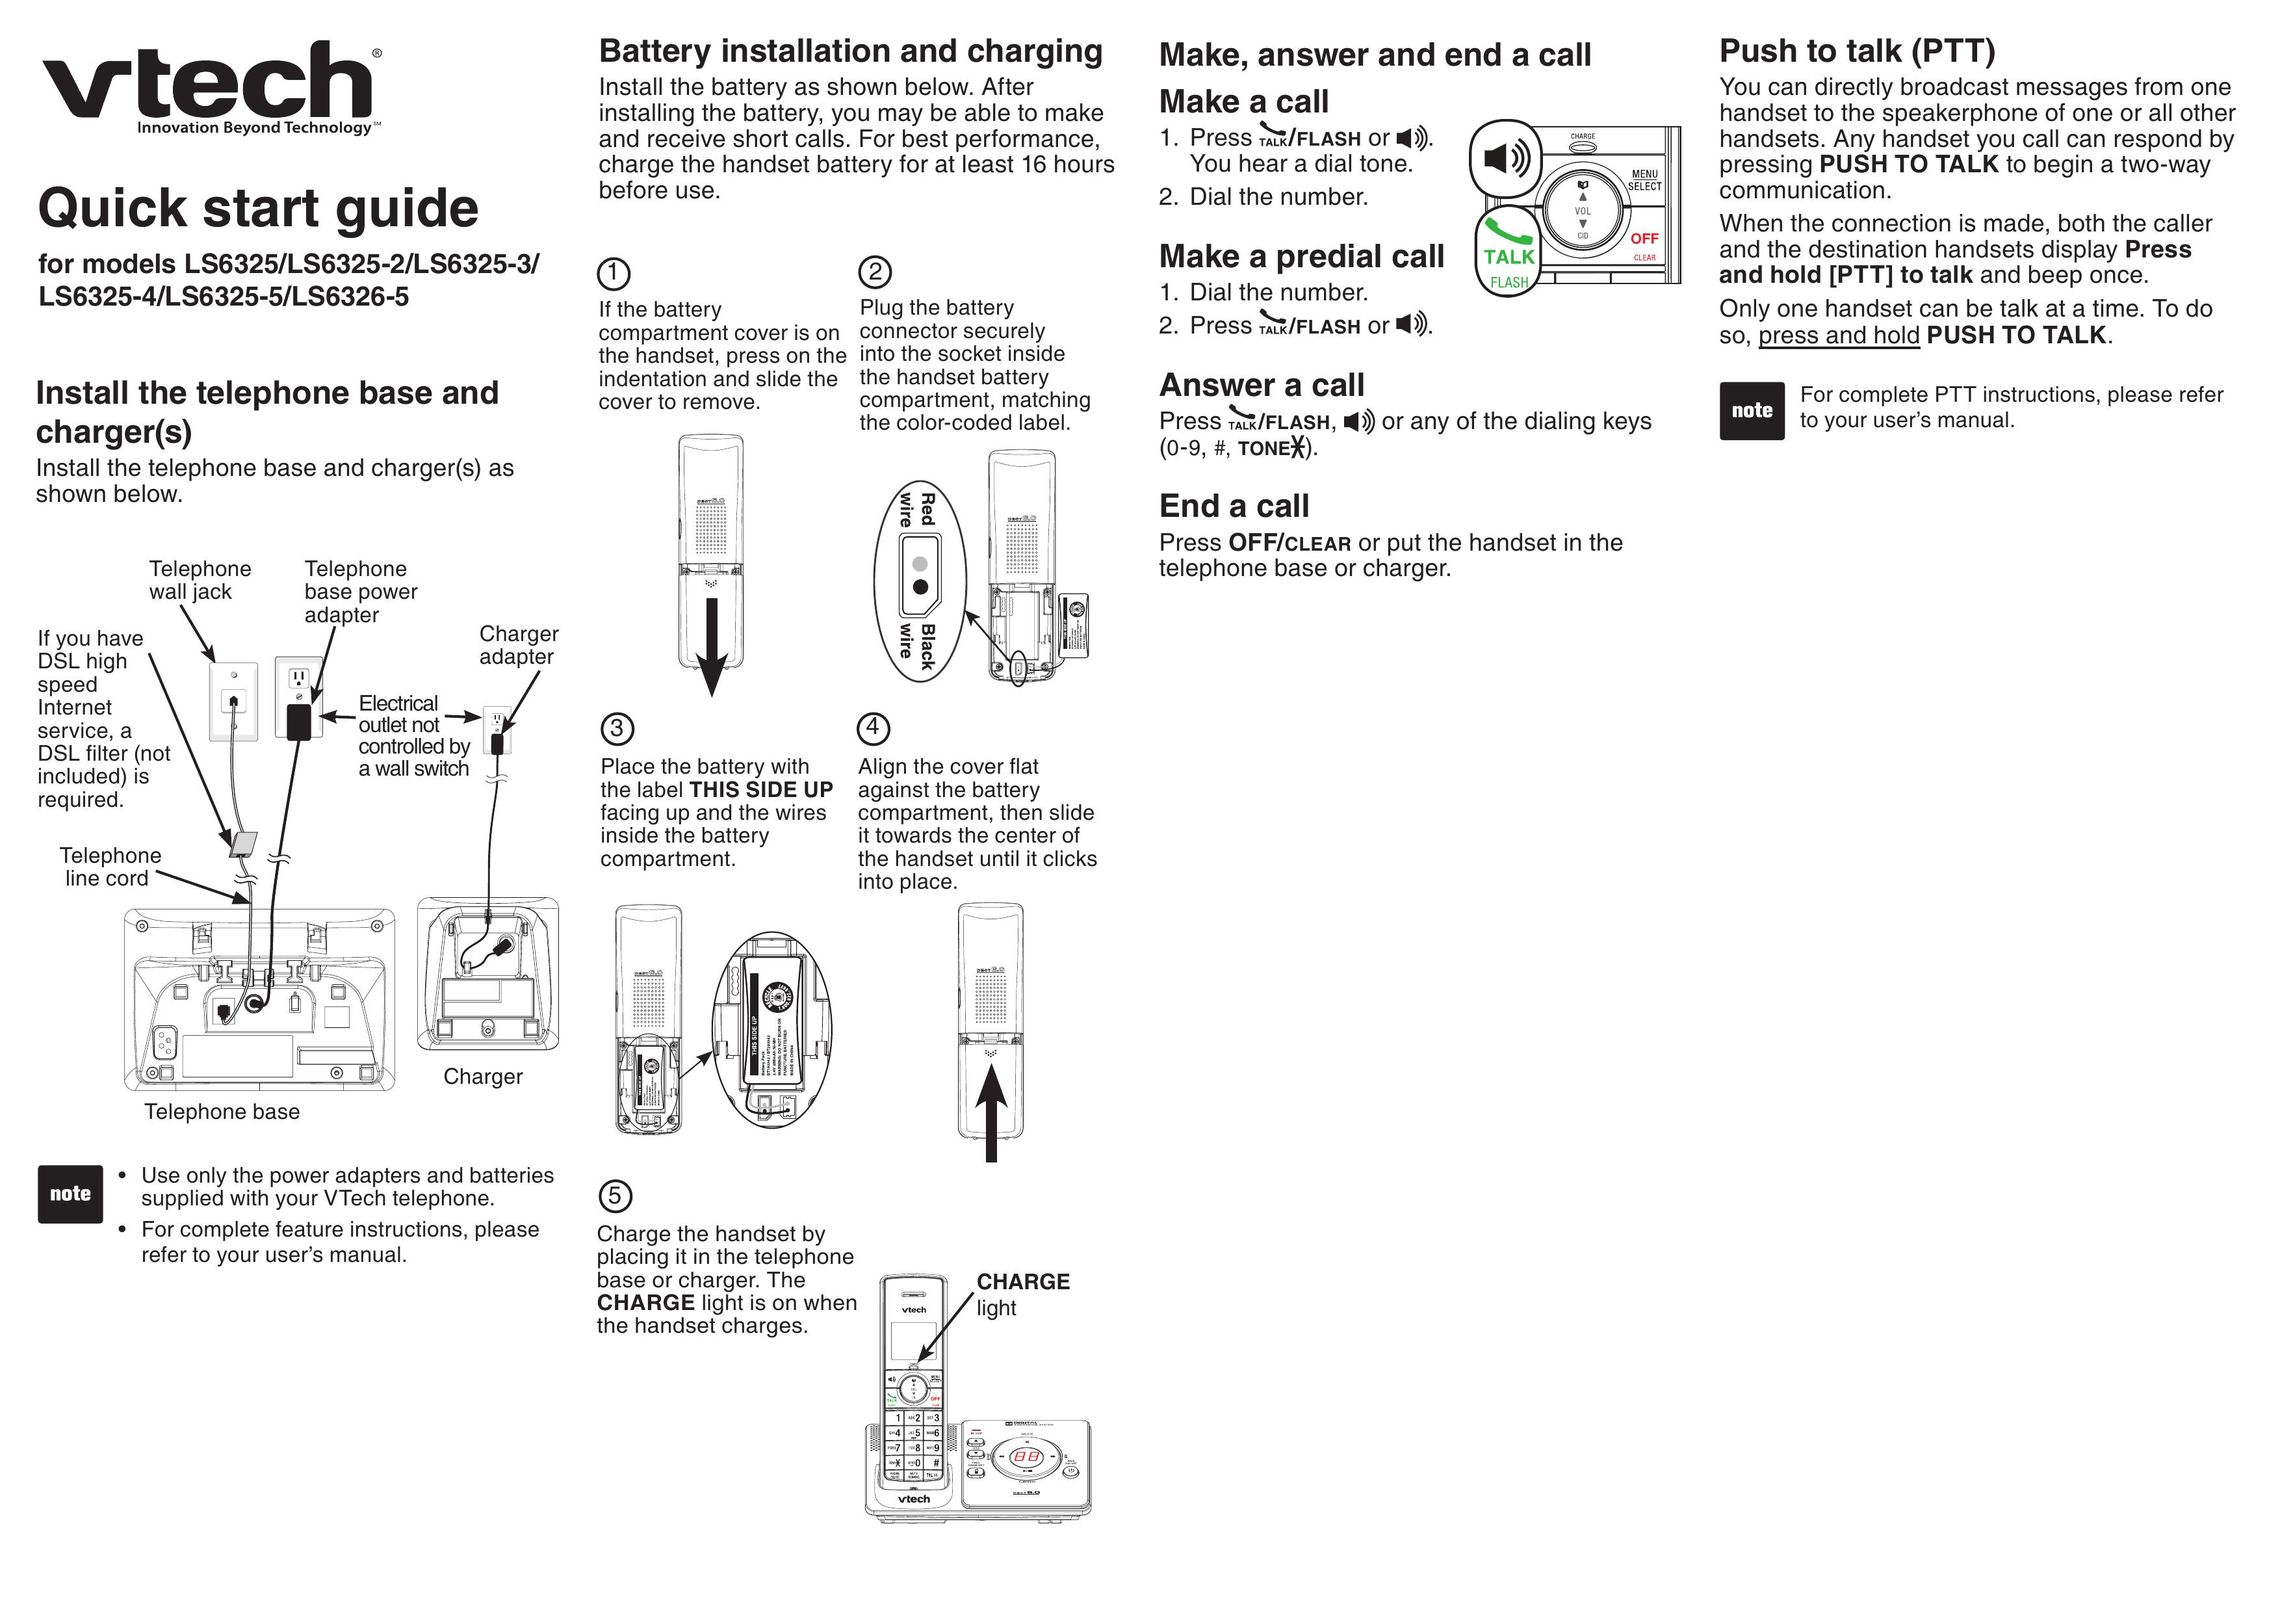 VTech LS6326-5 Battery Charger User Manual